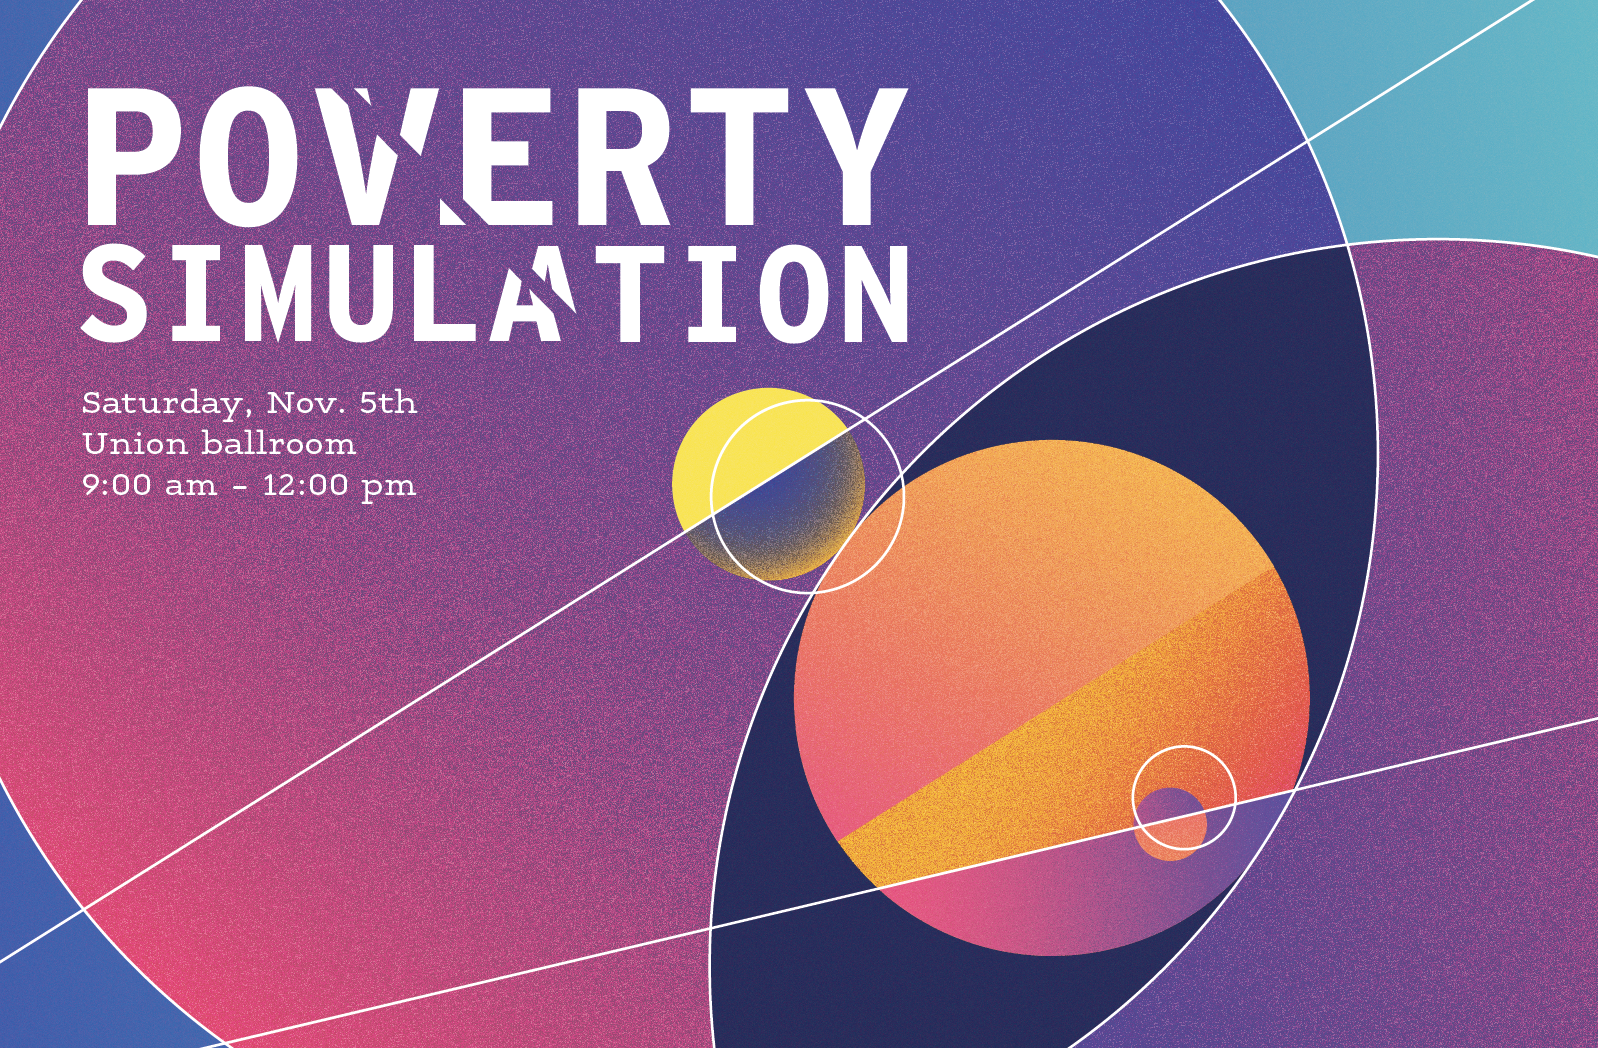 The Poverty Simulation